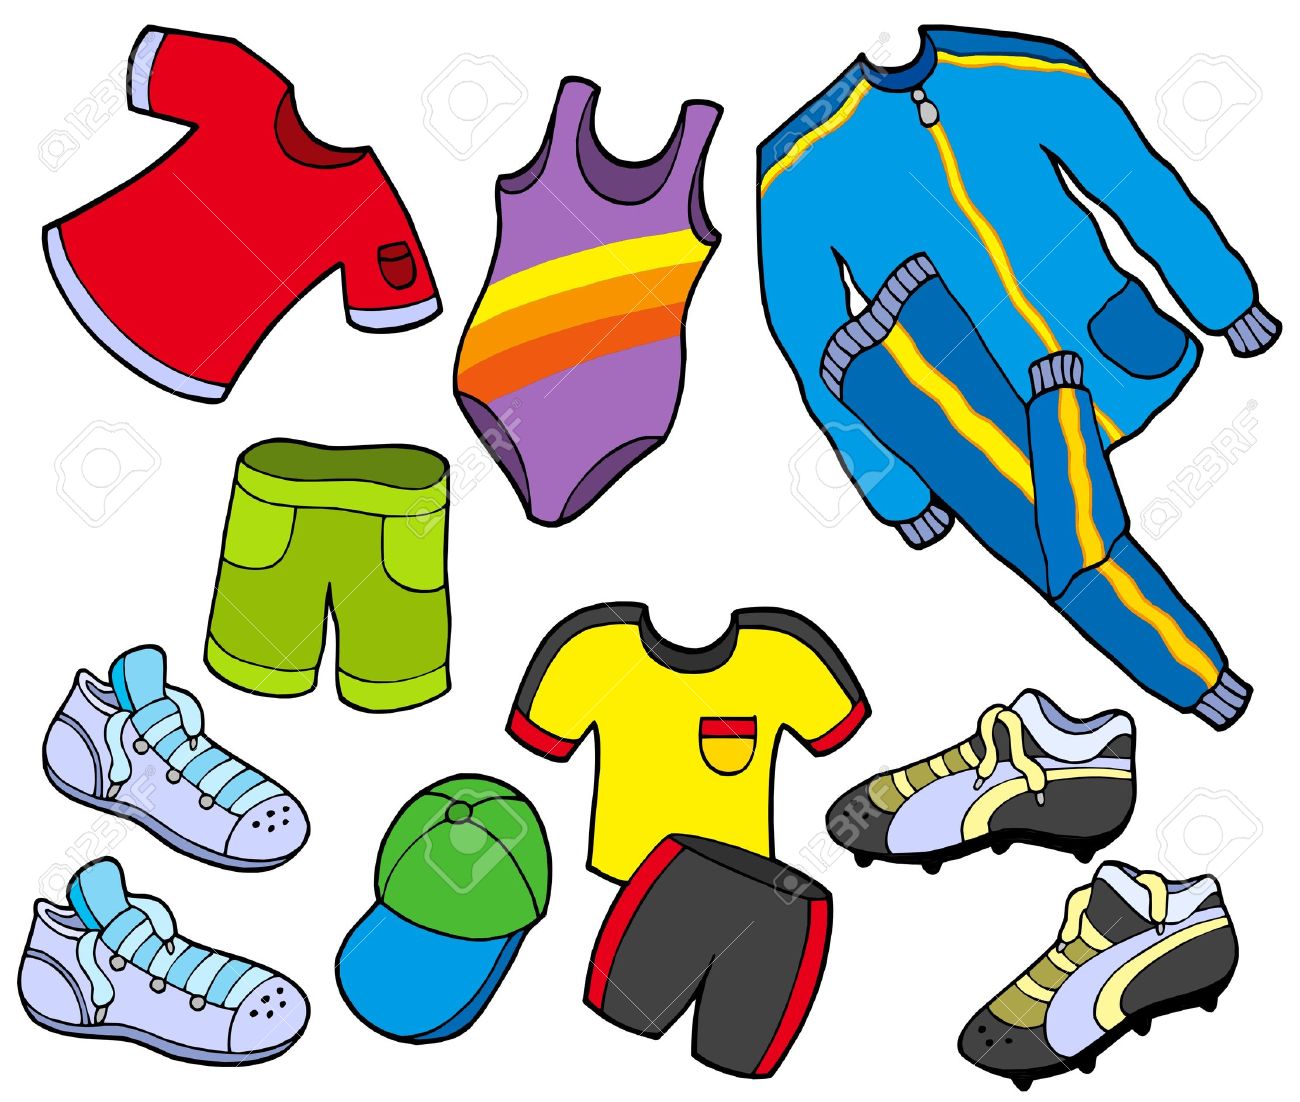 Sports and fitness icons set 